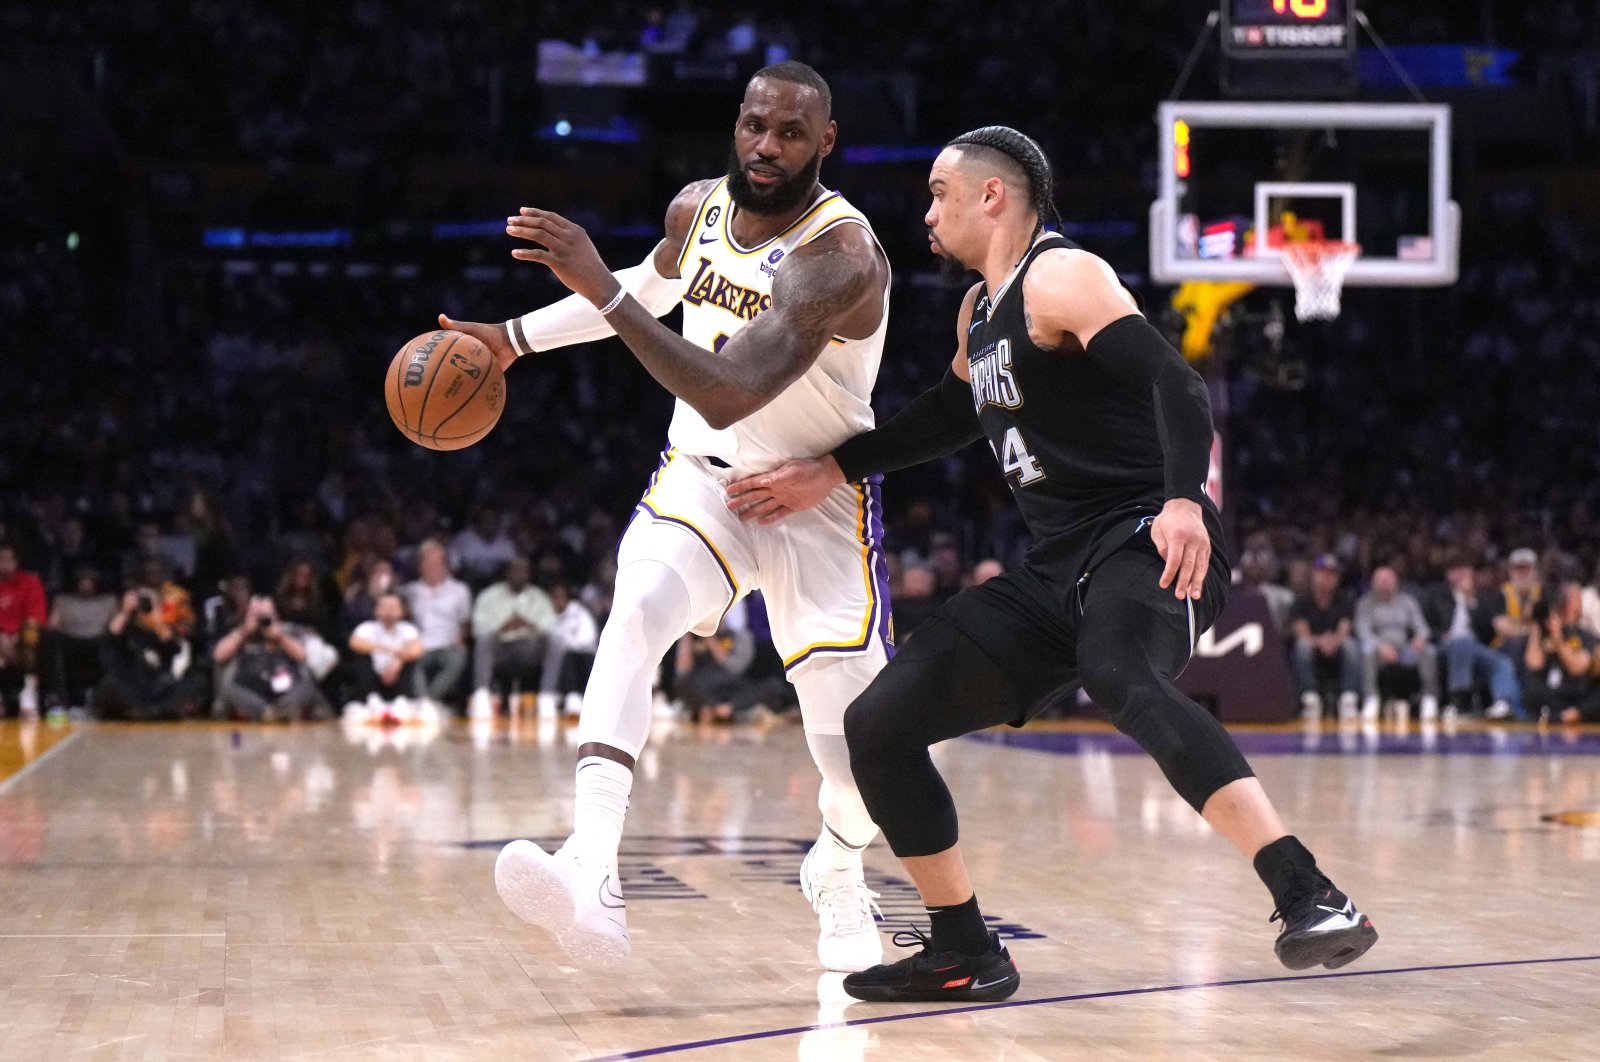 Los Angeles Lakers forward LeBron James (L) dribbles the ball against Memphis Grizzlies forward Dillon Brooks (R) in the second quarter during game three of the 2023 NBA playoffs at Crypto.com Arena, Los Angeles, U.S., April 22, 2023. (Reuters Photo)